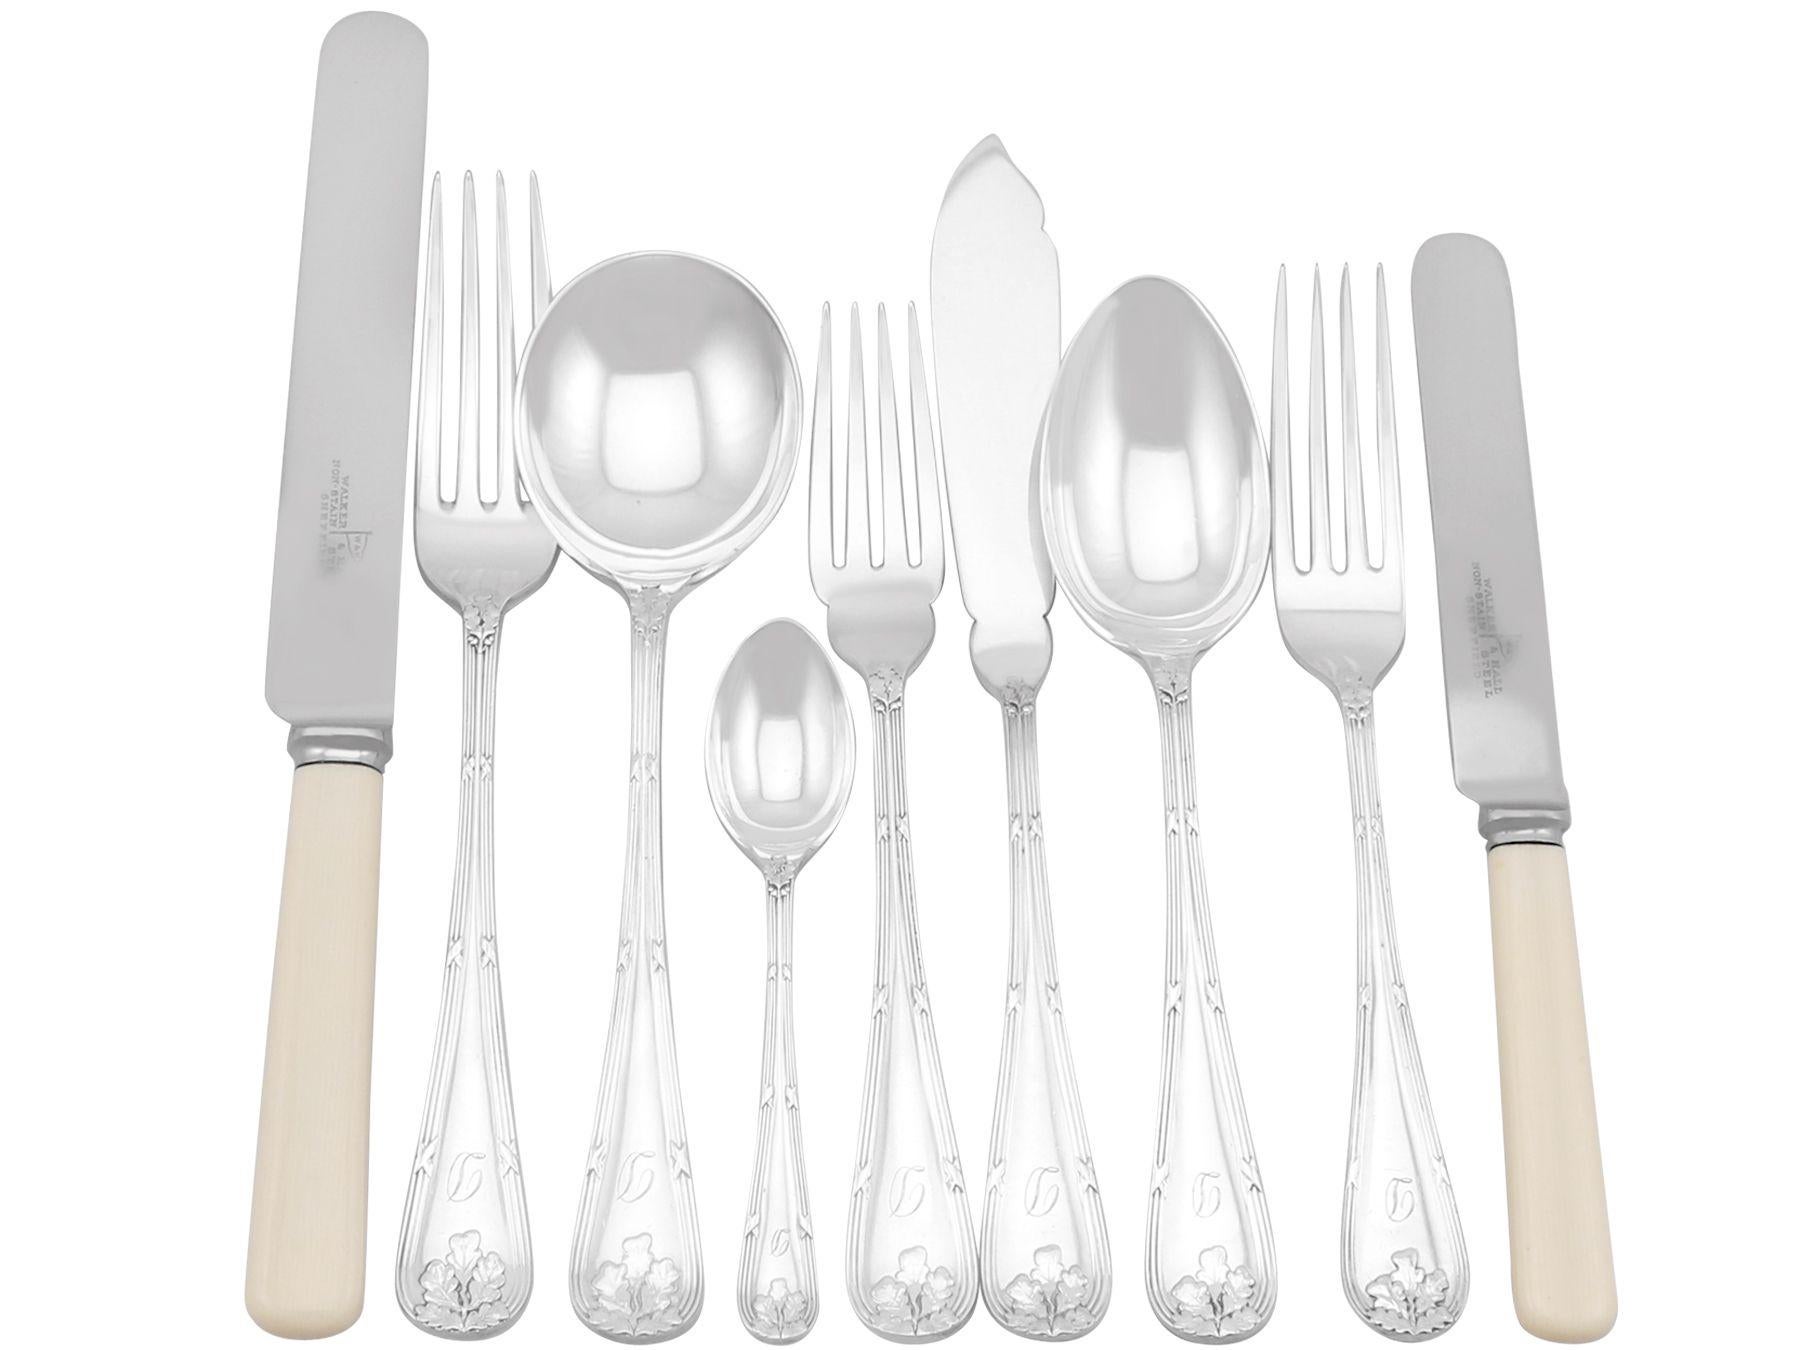 An exceptional, fine and impressive antique George V English sterling silver flatware service for twelve persons; an addition to our antique flatware sets.

The pieces of this exceptional antique George V sterling silver flatware set for twelve